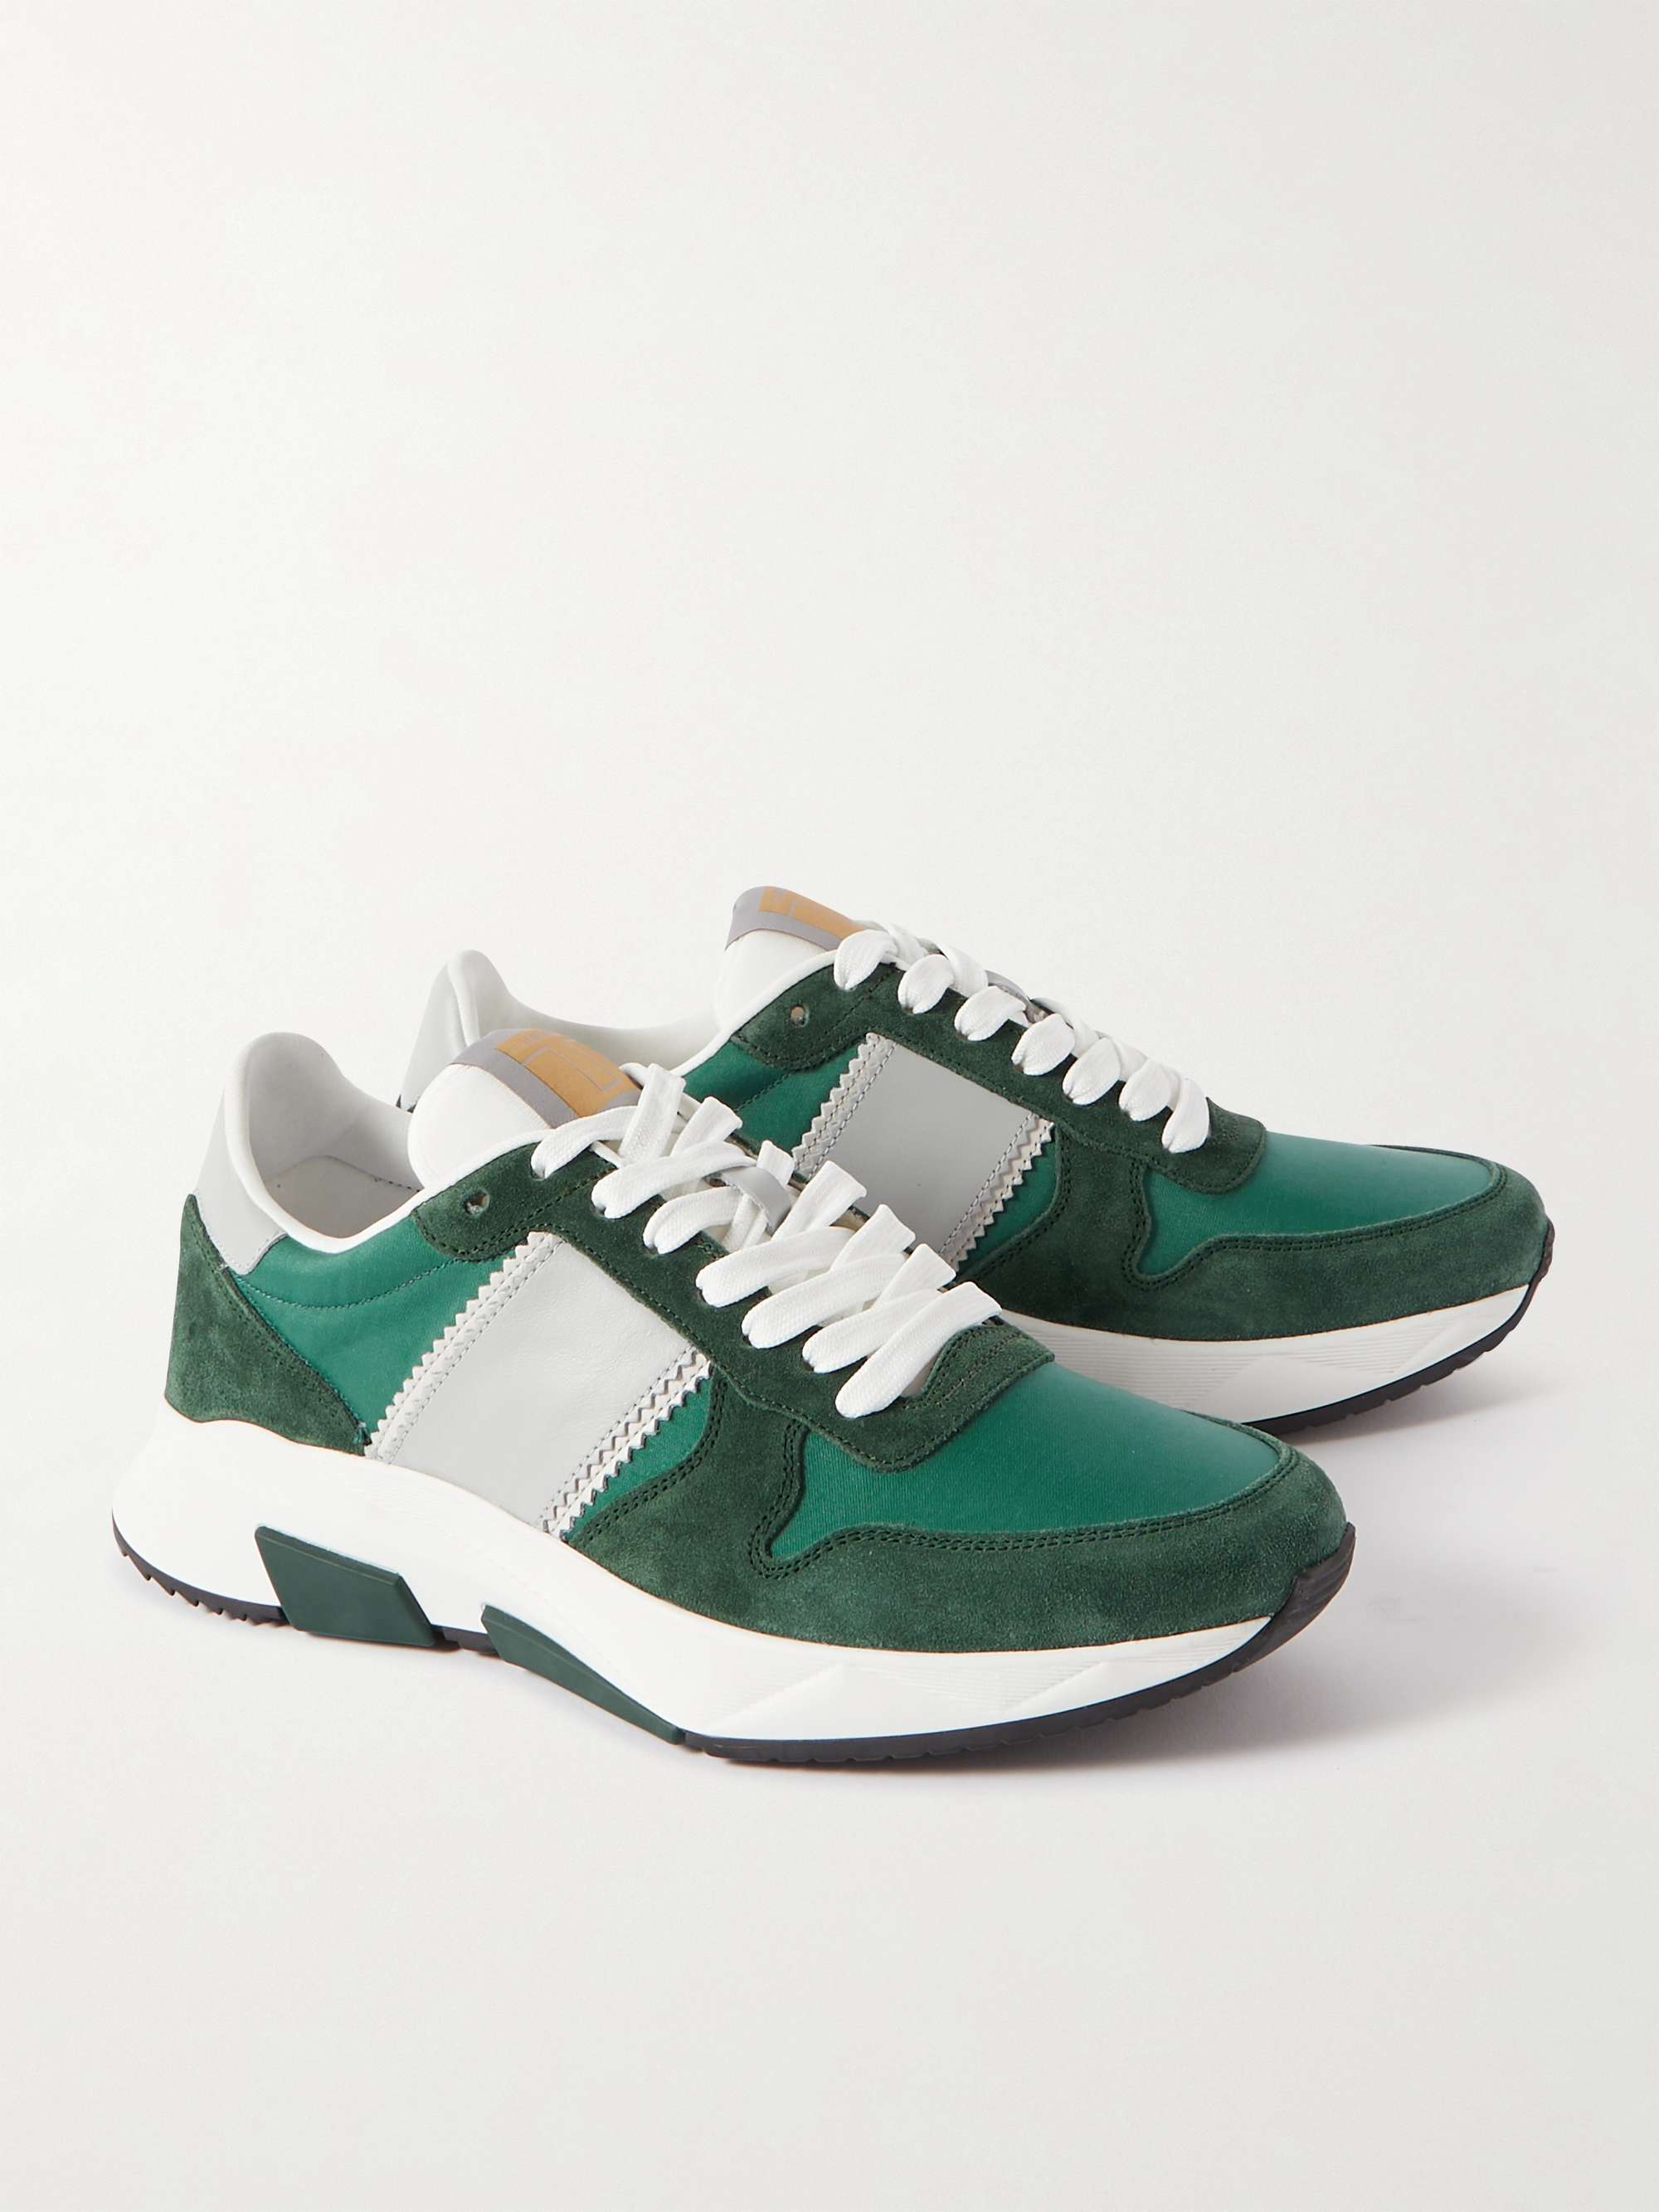 Green Jagga Leather-Trimmed Nylon and Suede Sneakers | TOM FORD | MR PORTER